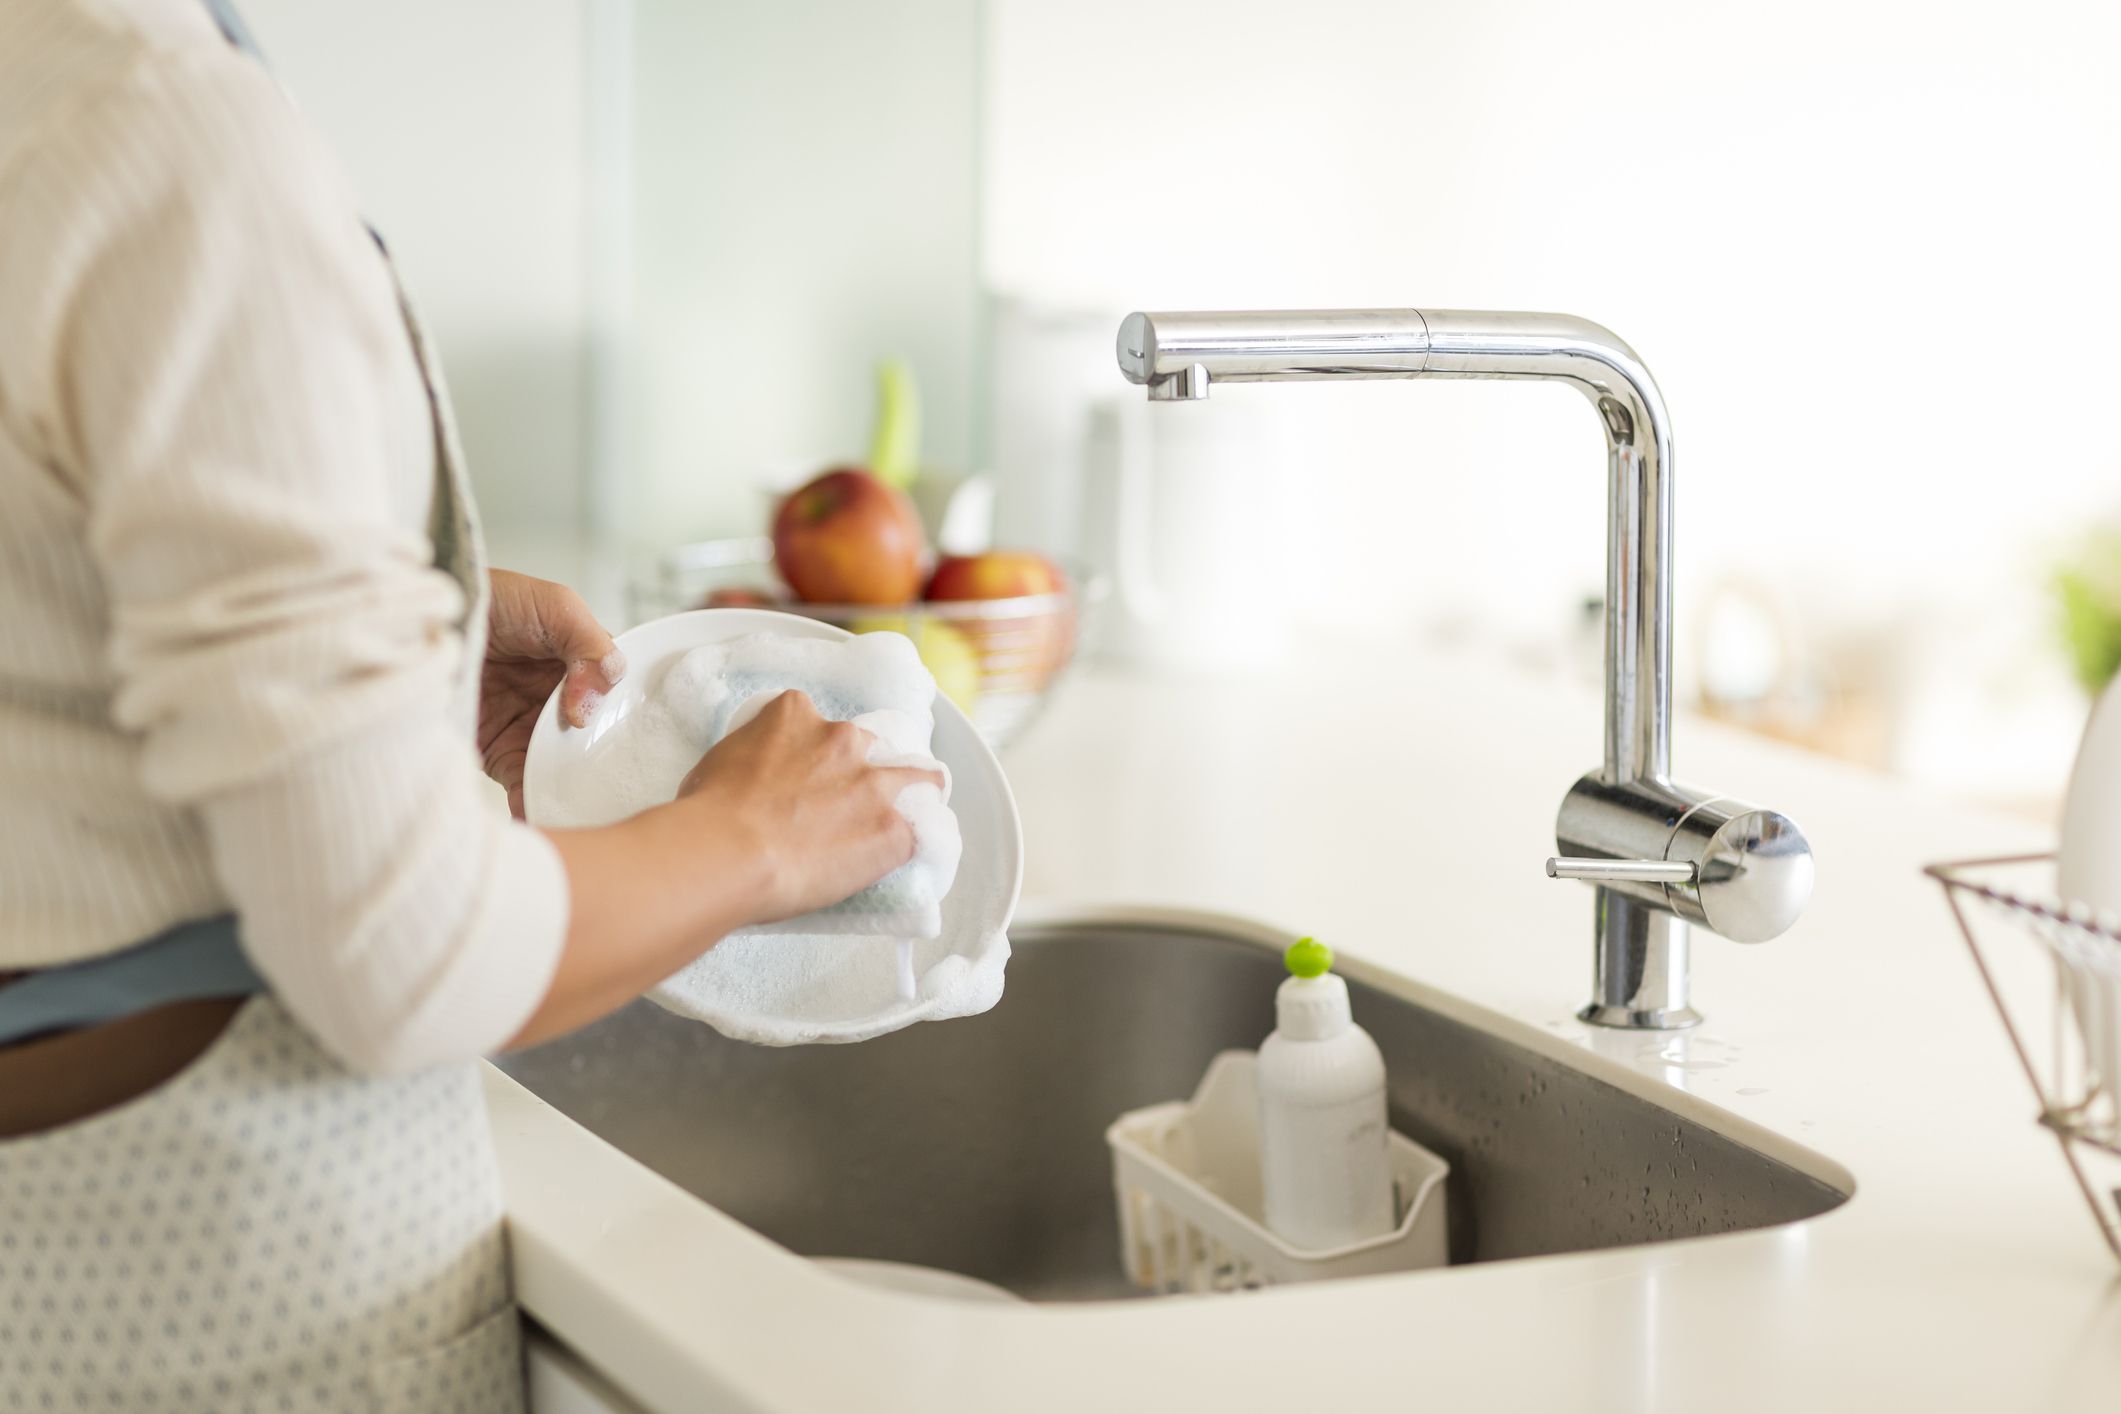 We Tested the Best Sink Caddies for Keeping Your Kitchen Clean and Organized